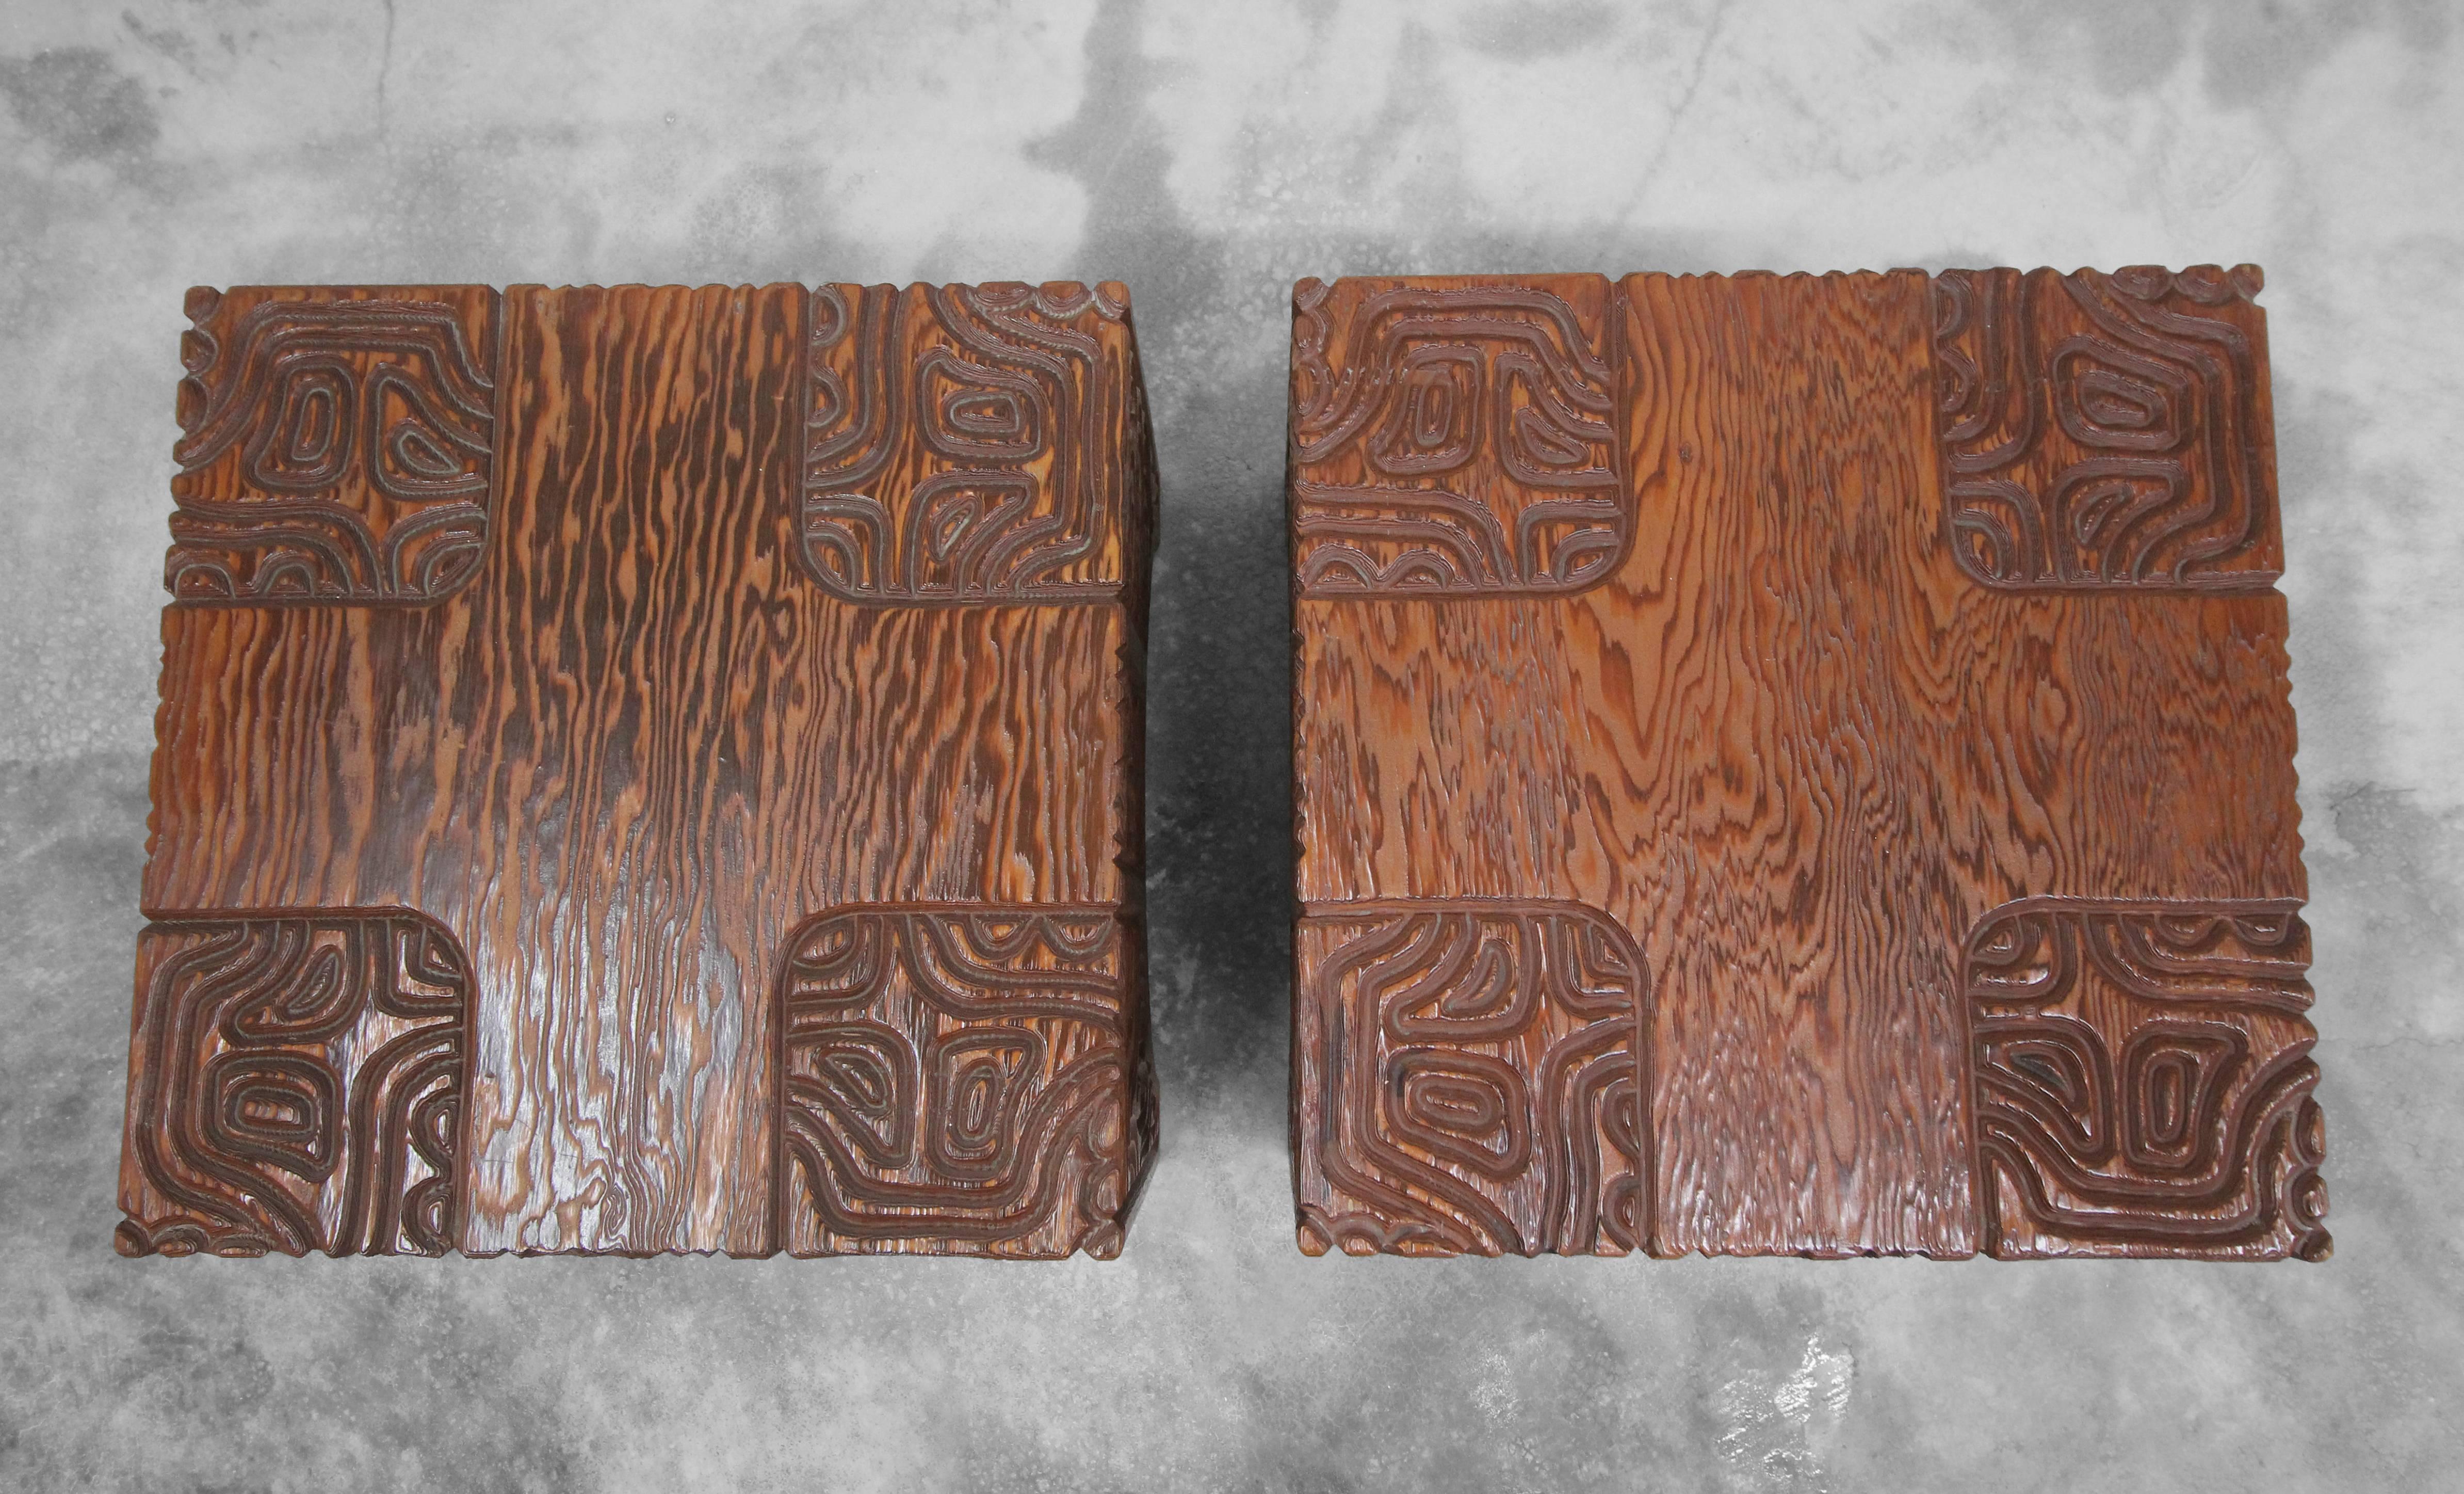 Pair of Midcentury Panelcarve Style Carved Wood End Tables by Sherrill Broudy 1